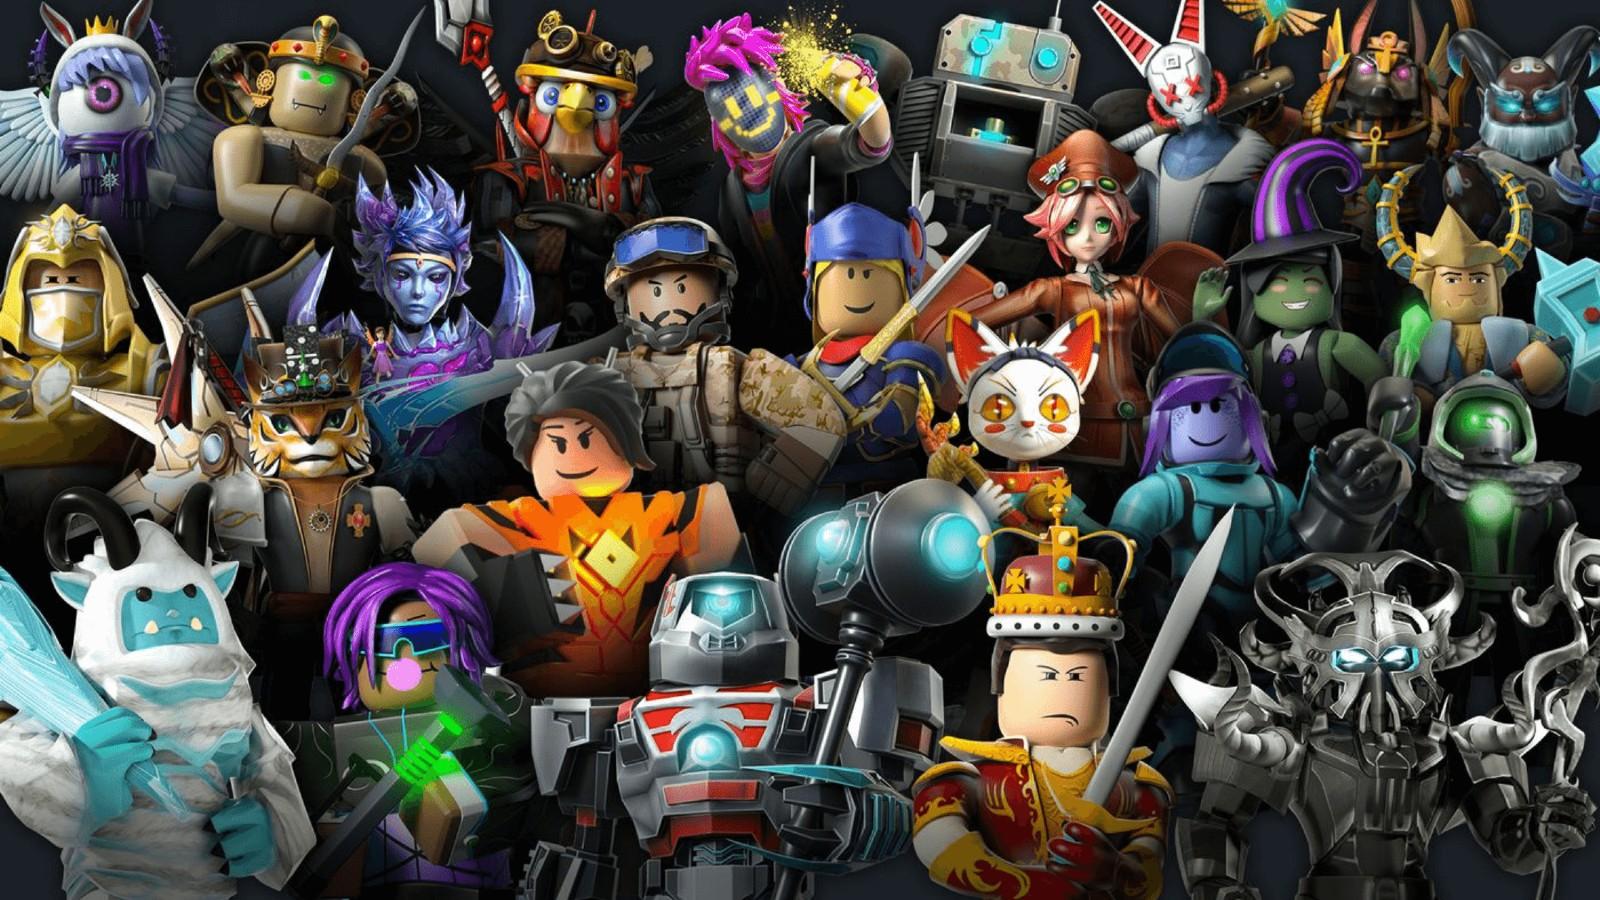 A promotional image from Roblox featuring many avatars.